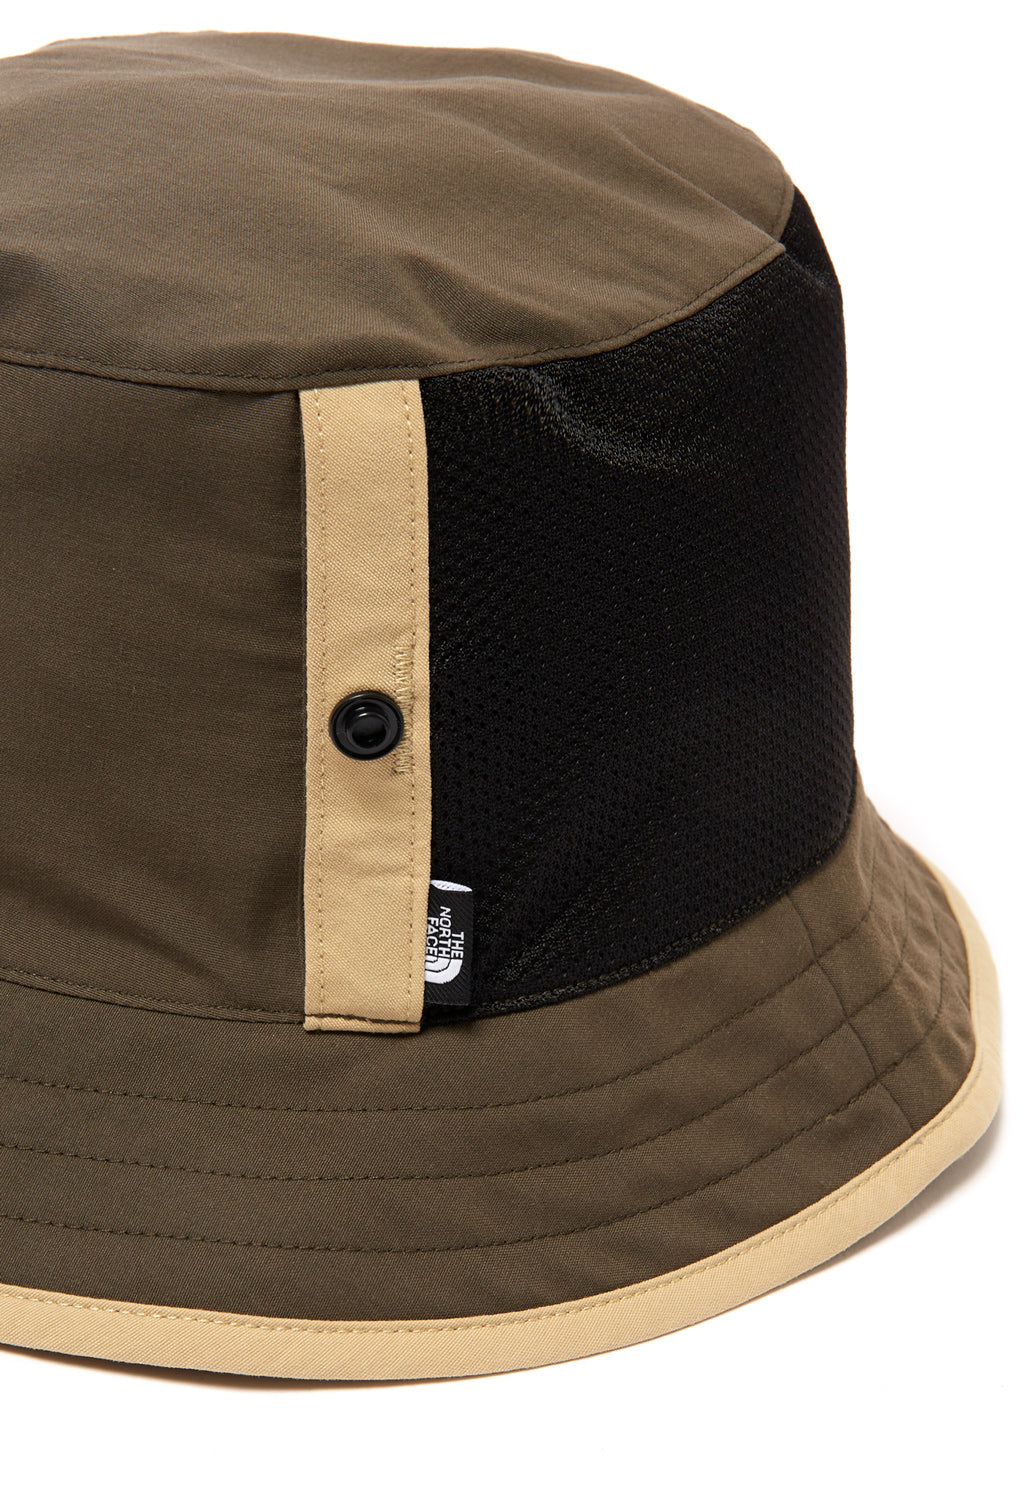 The North Face Class V Reversible Bucket Hat - New Taupe Green/Khaki